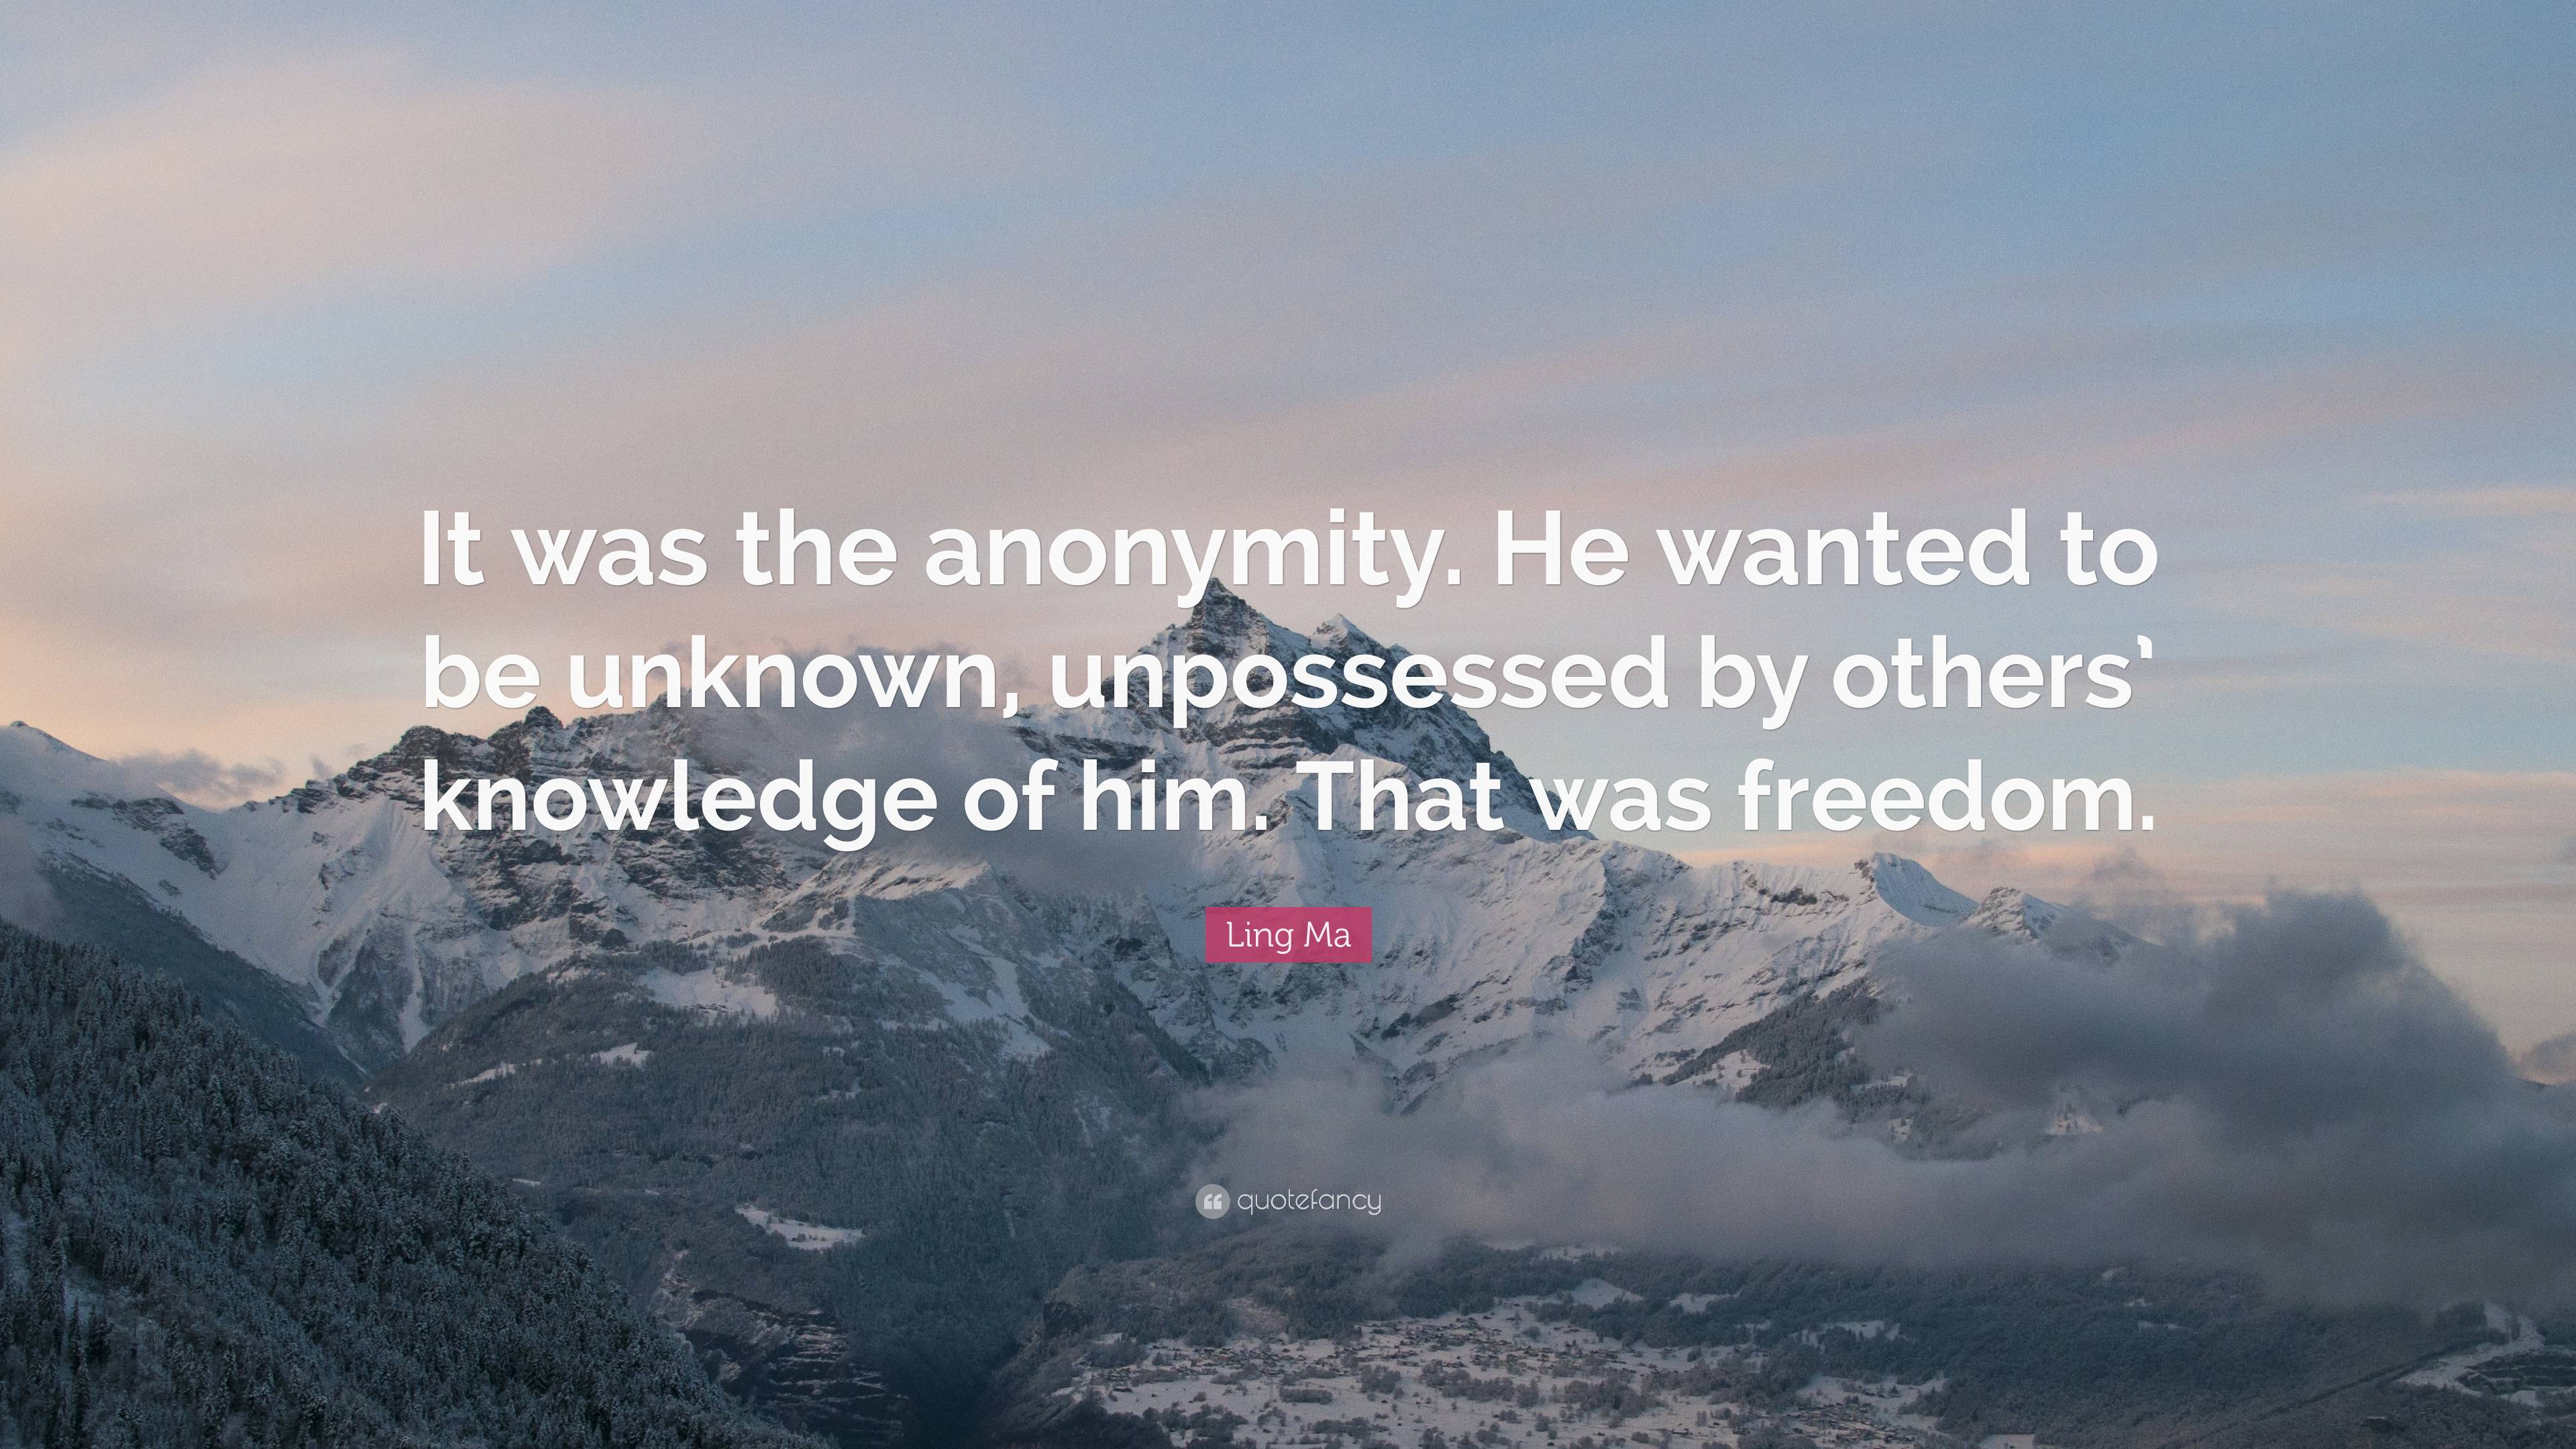 Ling Ma Quote: “It was the anonymity. He wanted to be unknown ...